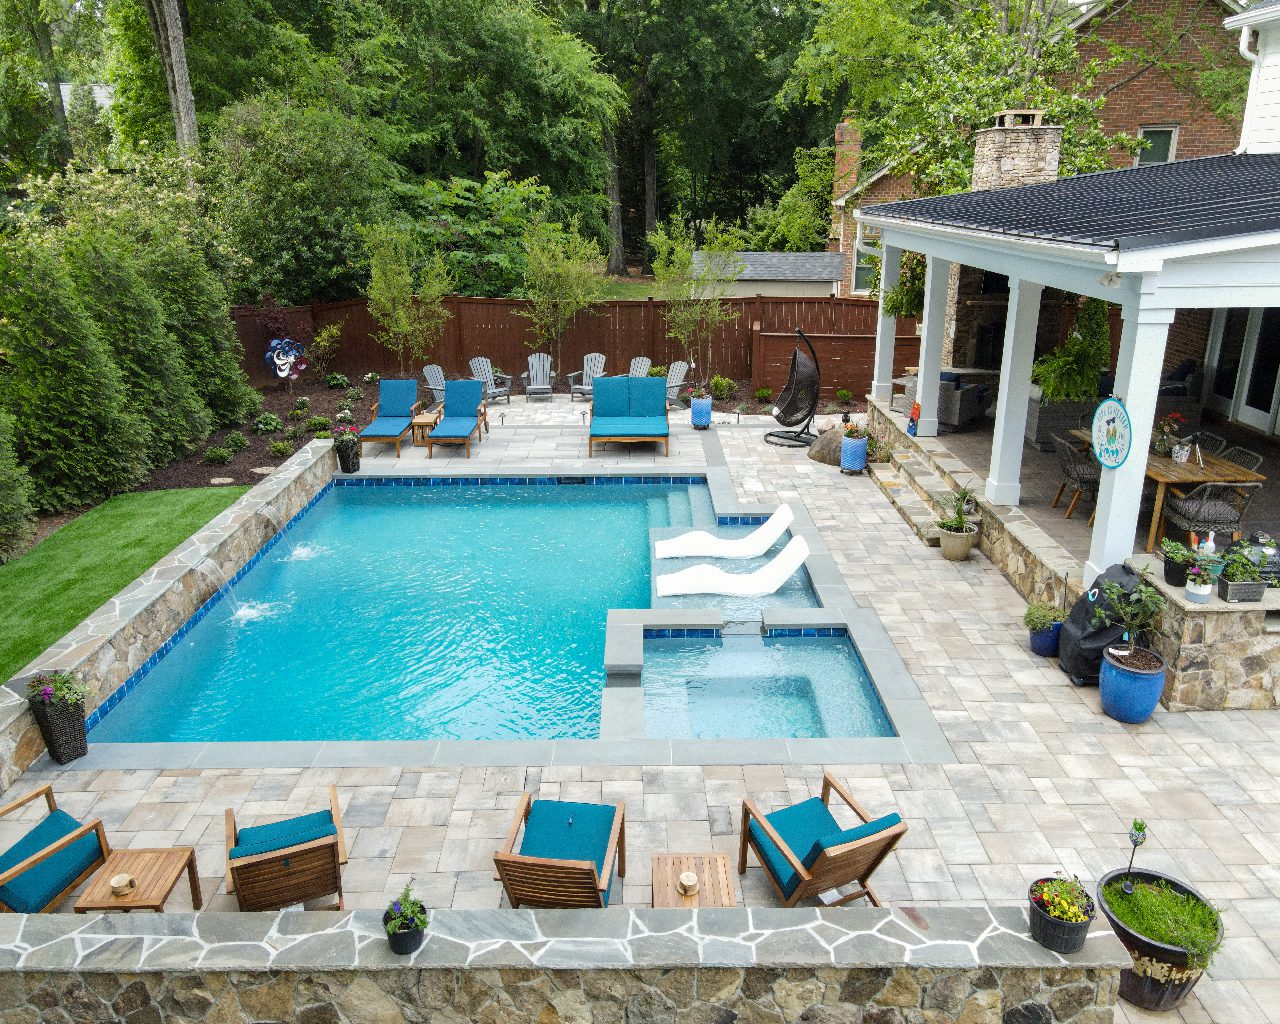 Overview of backyard with pool/hot tub and waterfall